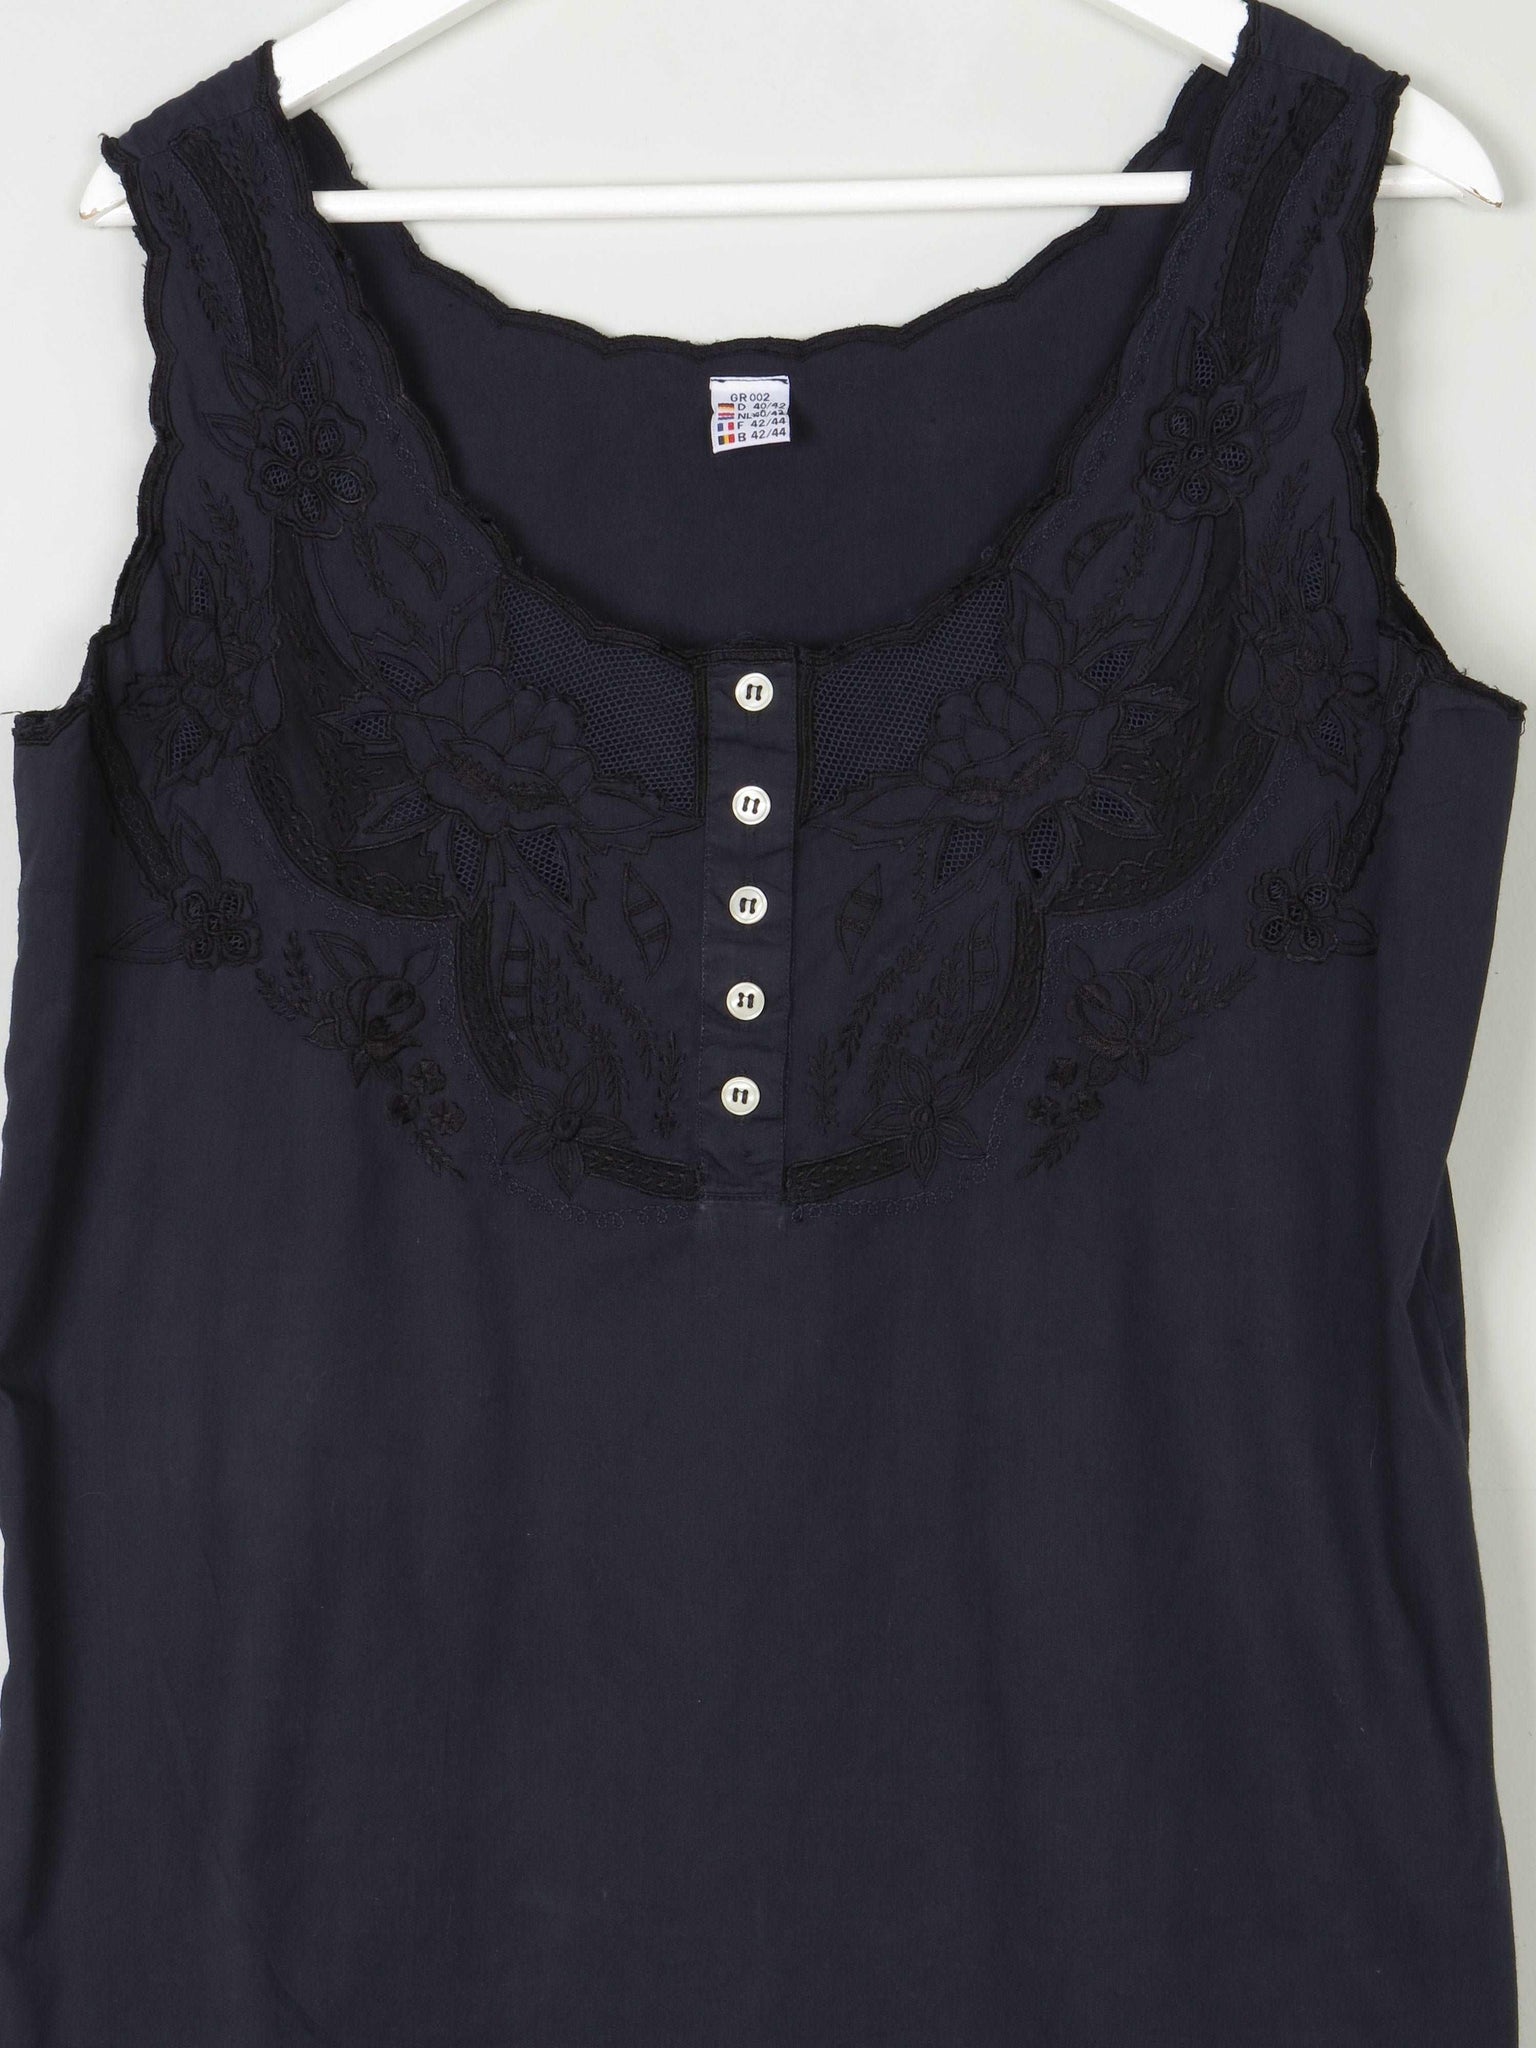 Women’s Black Cotton Camisole Top With Cut-Out Detail 14 Approx - The Harlequin